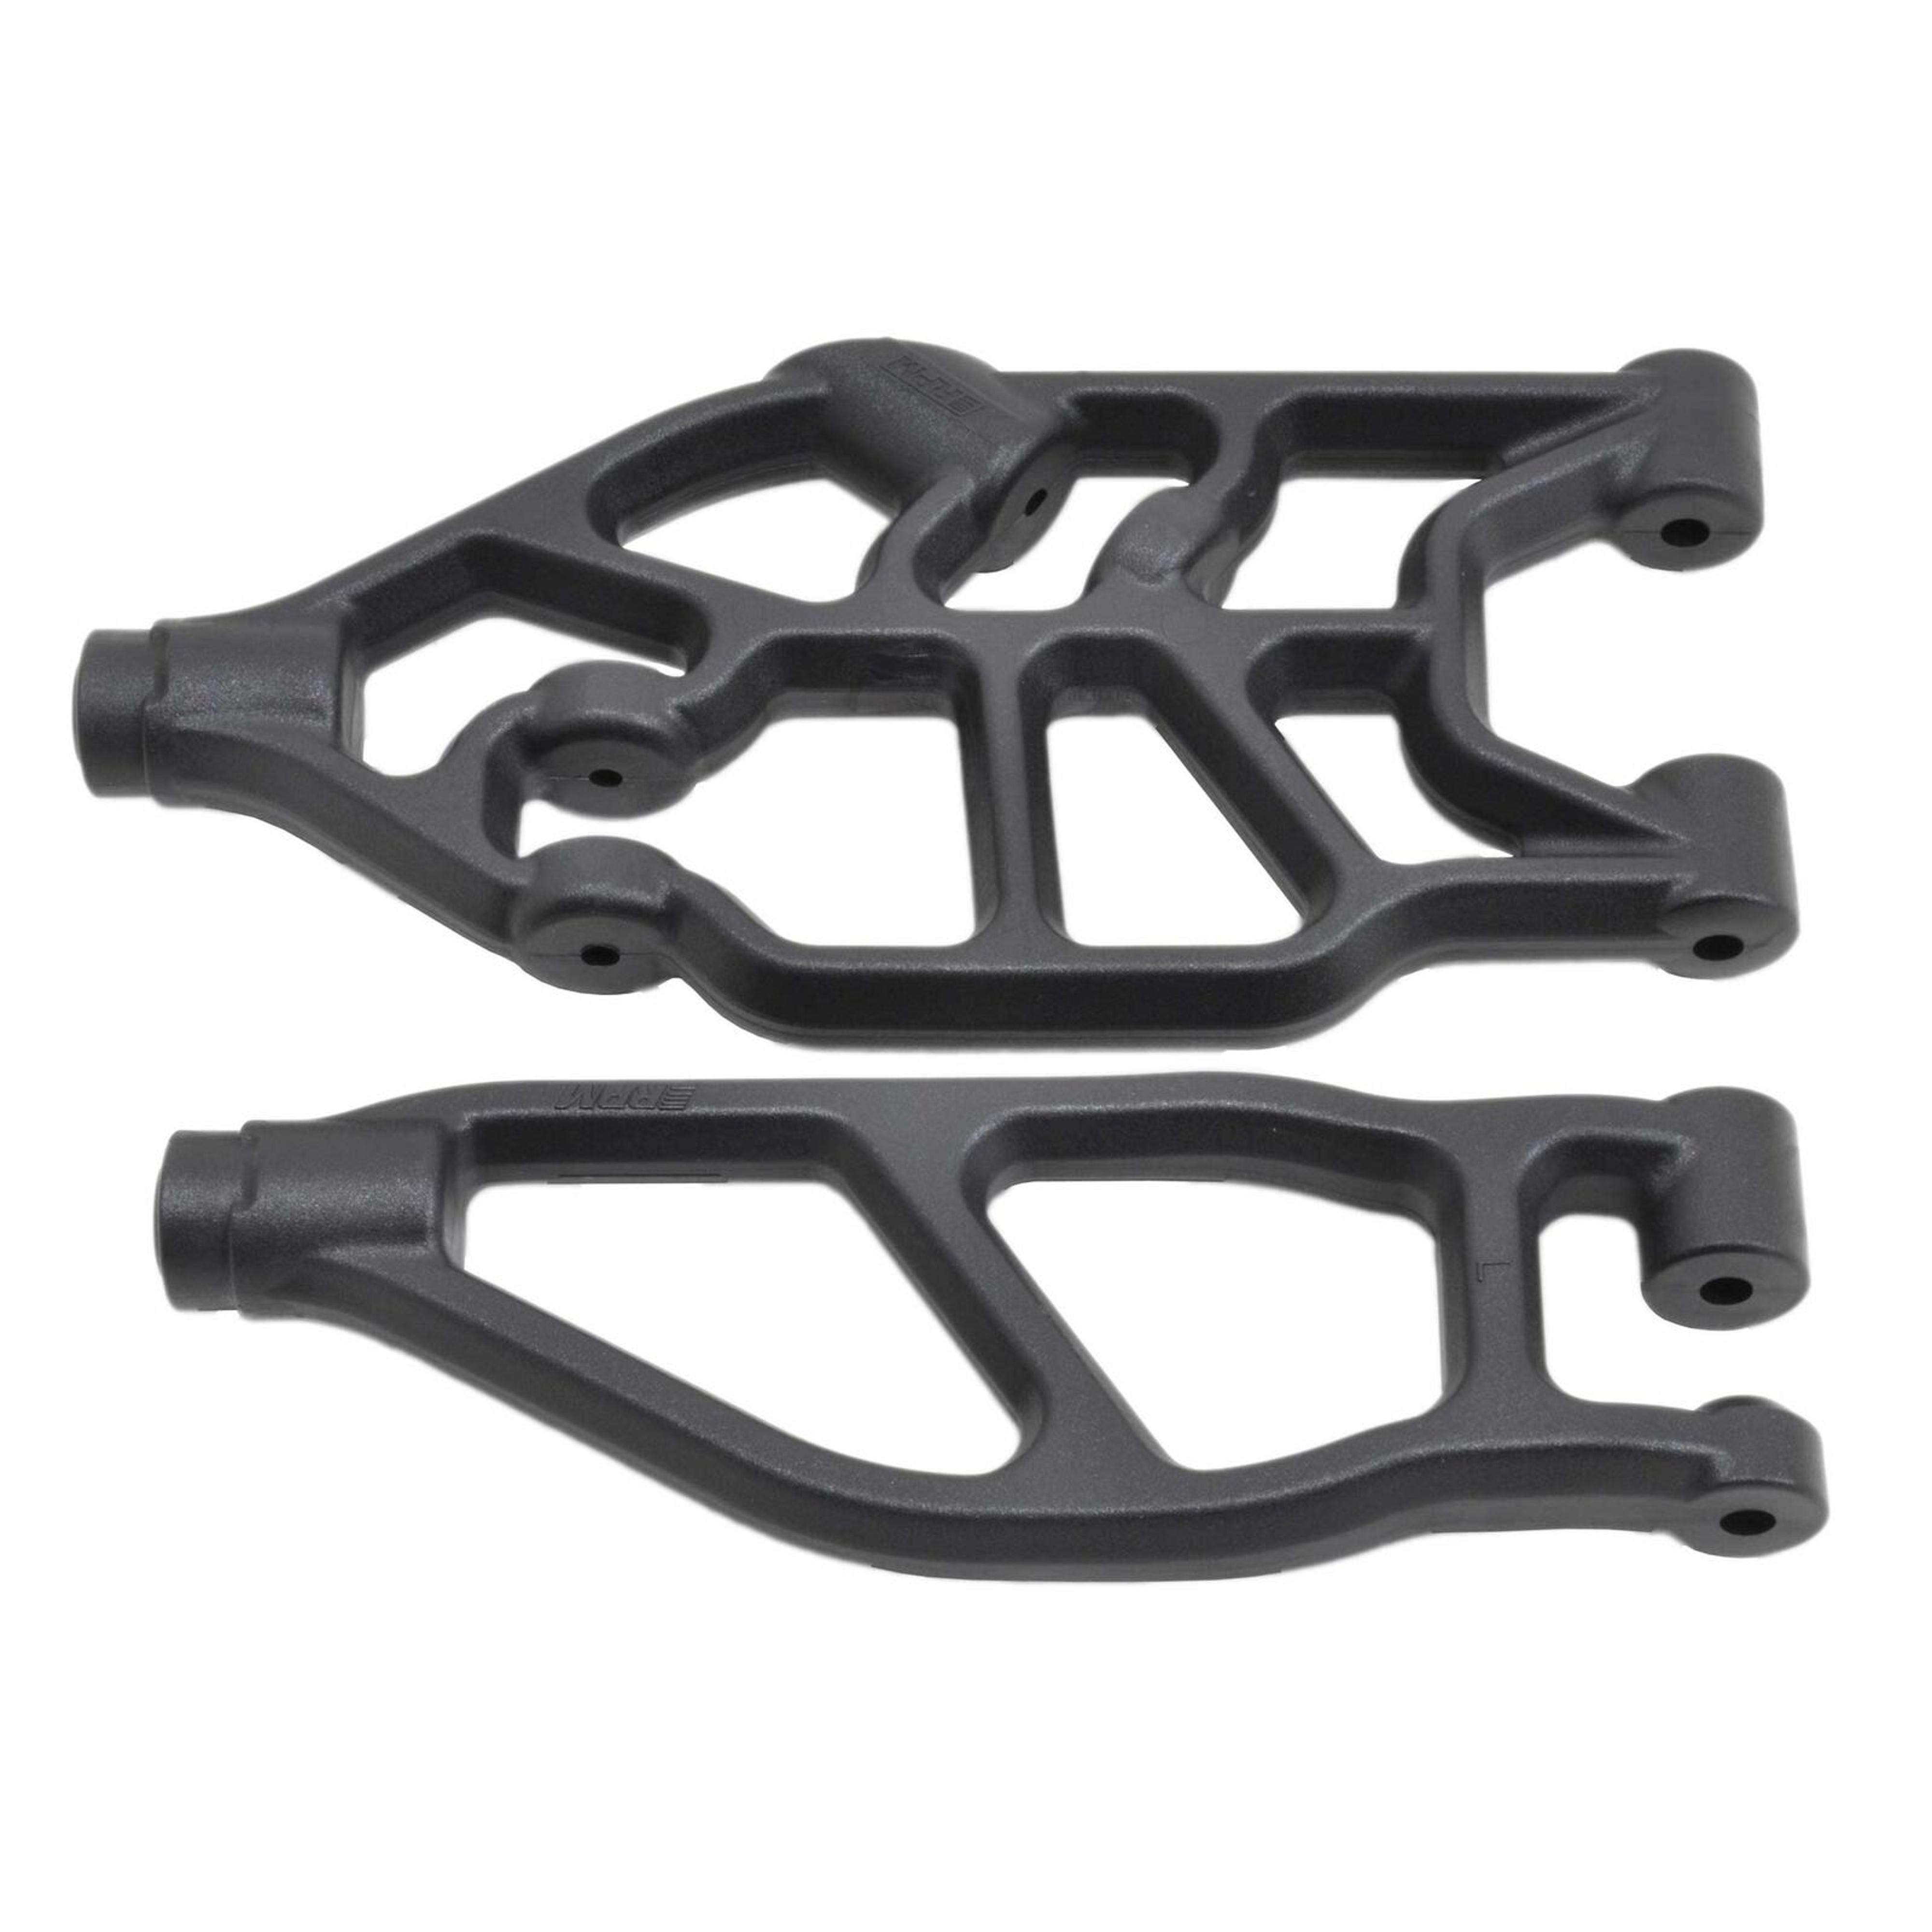 RPM ARRMA Kraton 8S Left Upper and Lower A-Arms